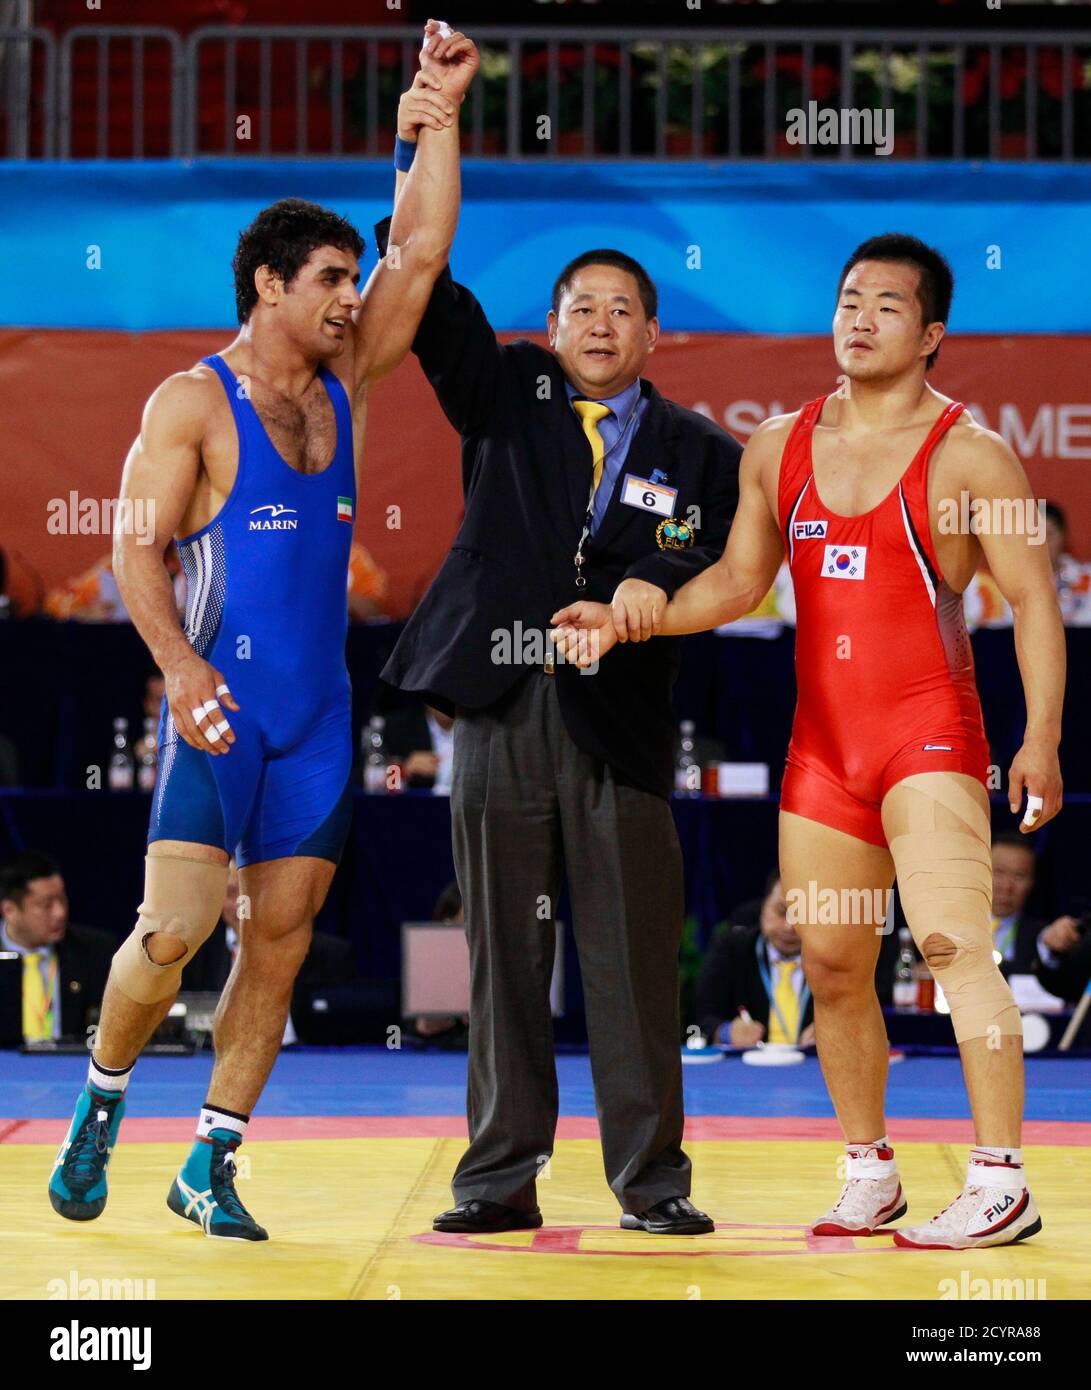 Jamal Mirzaei (L) of Iran has his arm raised after defeating Lee Jae-sung  of South Korea in their men's final 84kg freestyle wrestling bout at the  16th Asian Games in Guangzhou, Guangdong